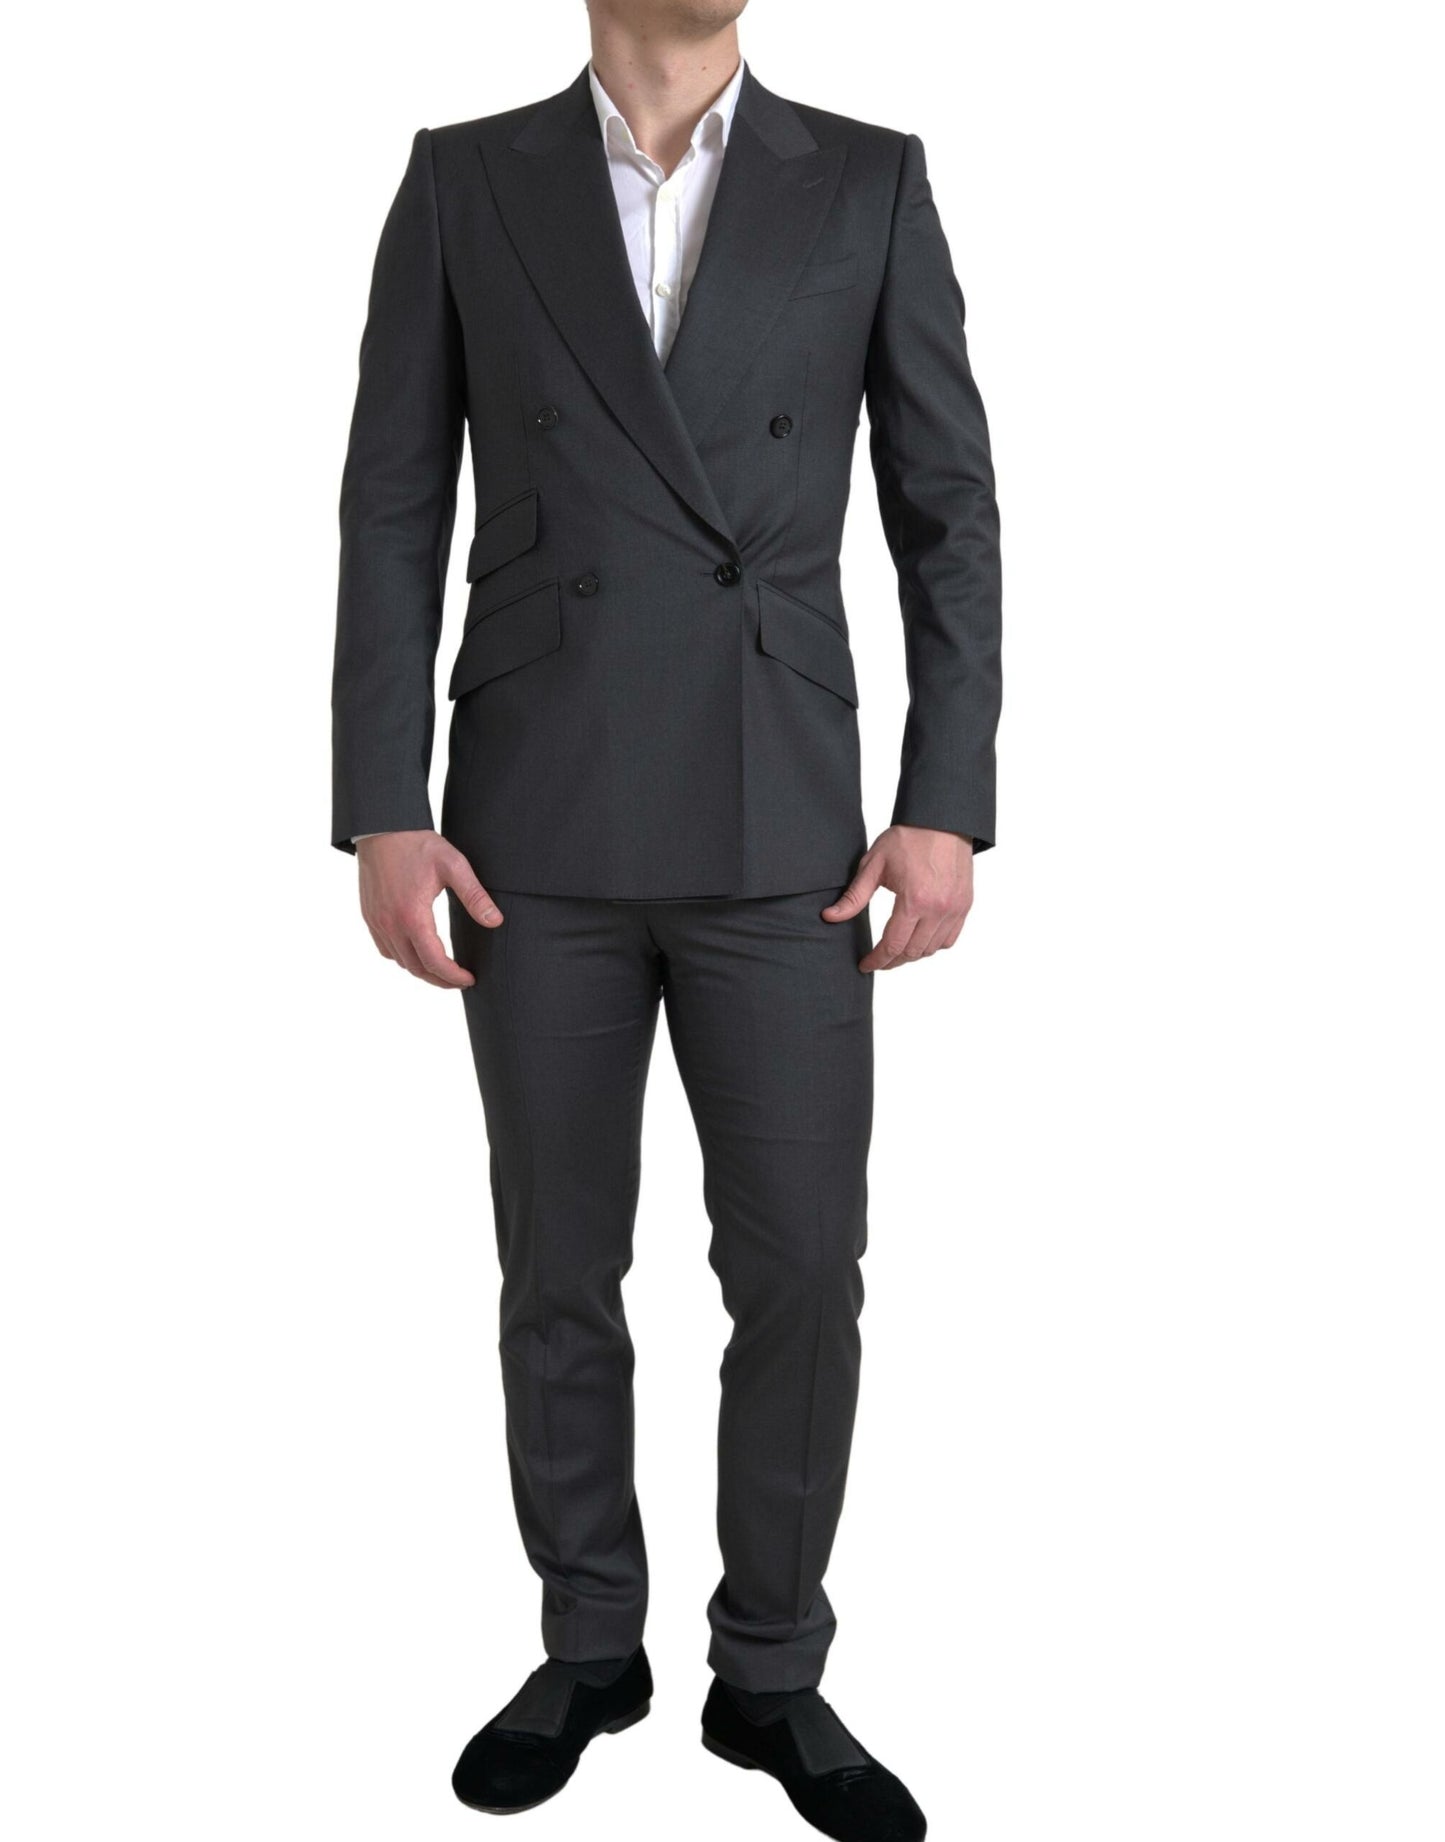 Dolce & Gabbana Sleek Grey Slim Fit Double Breasted Suit